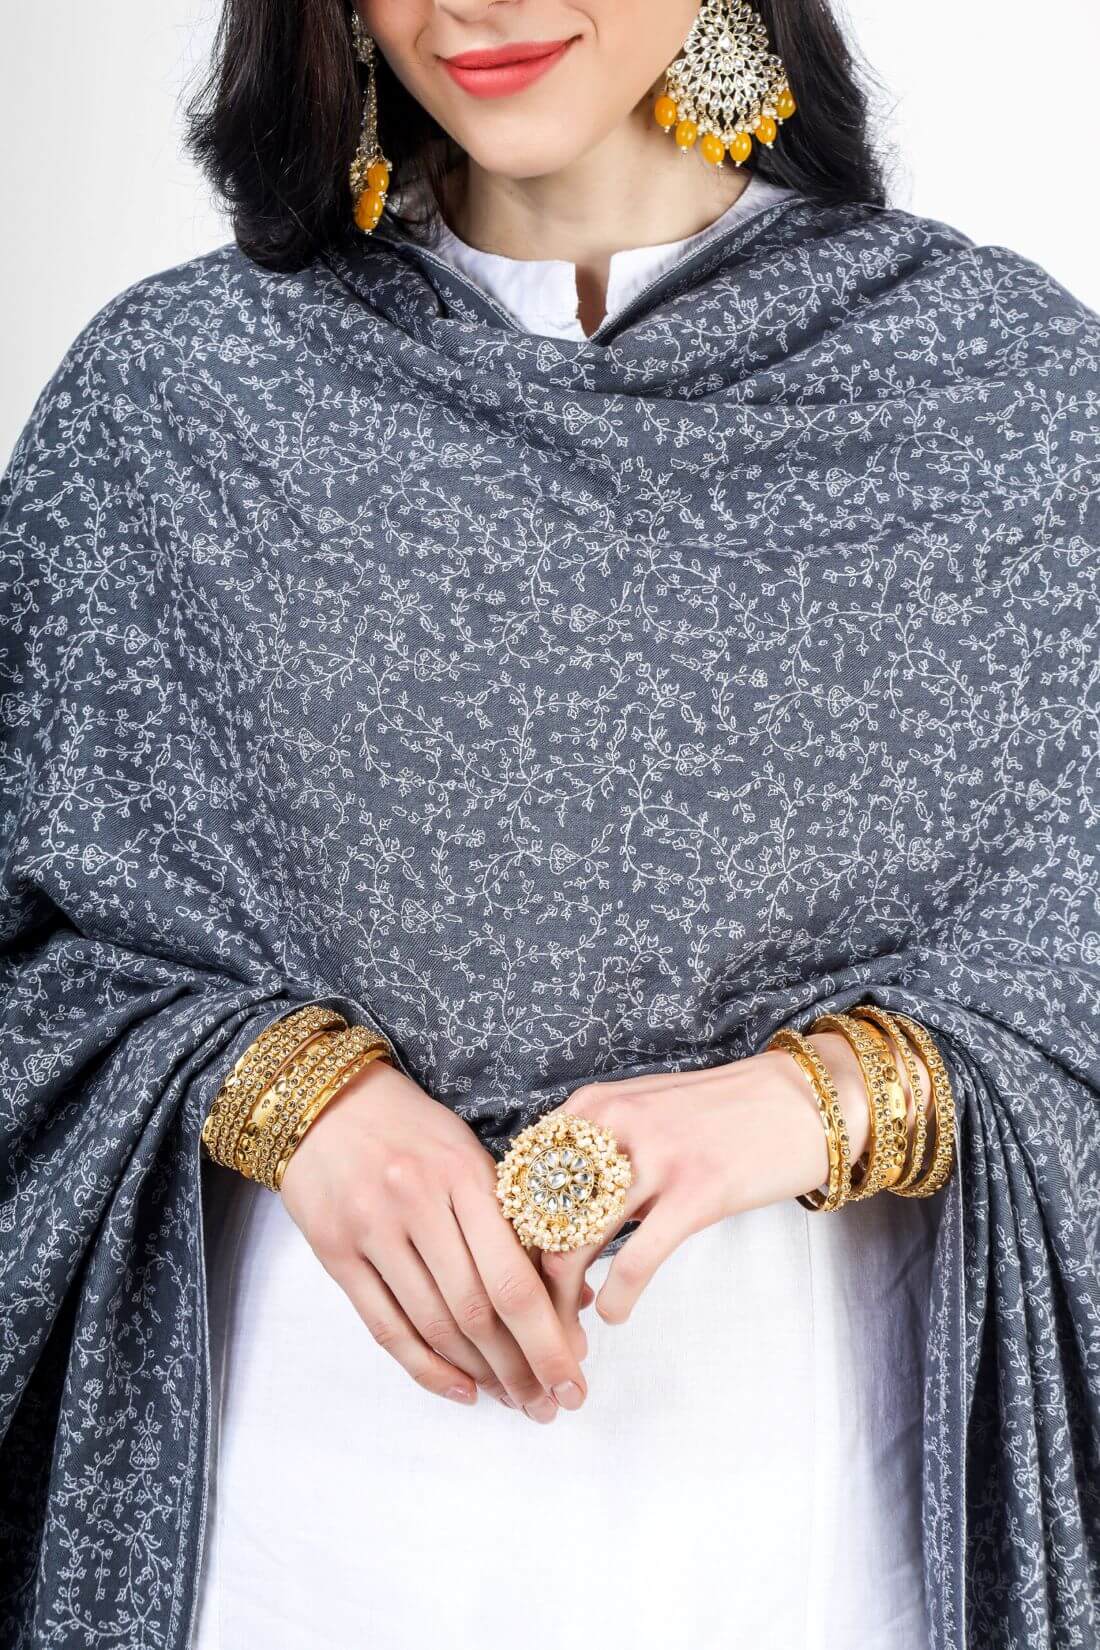  This Gray pashmina shawl Jaldaar can be draped over the shoulders to add a touch of elegance to any outfit. It can also be worn as a hijab or headscarf for a modest and stylish look. The intricate embroidery and unique pattern make this shawl a truly one-of-a-kind piece that is sure to impress.